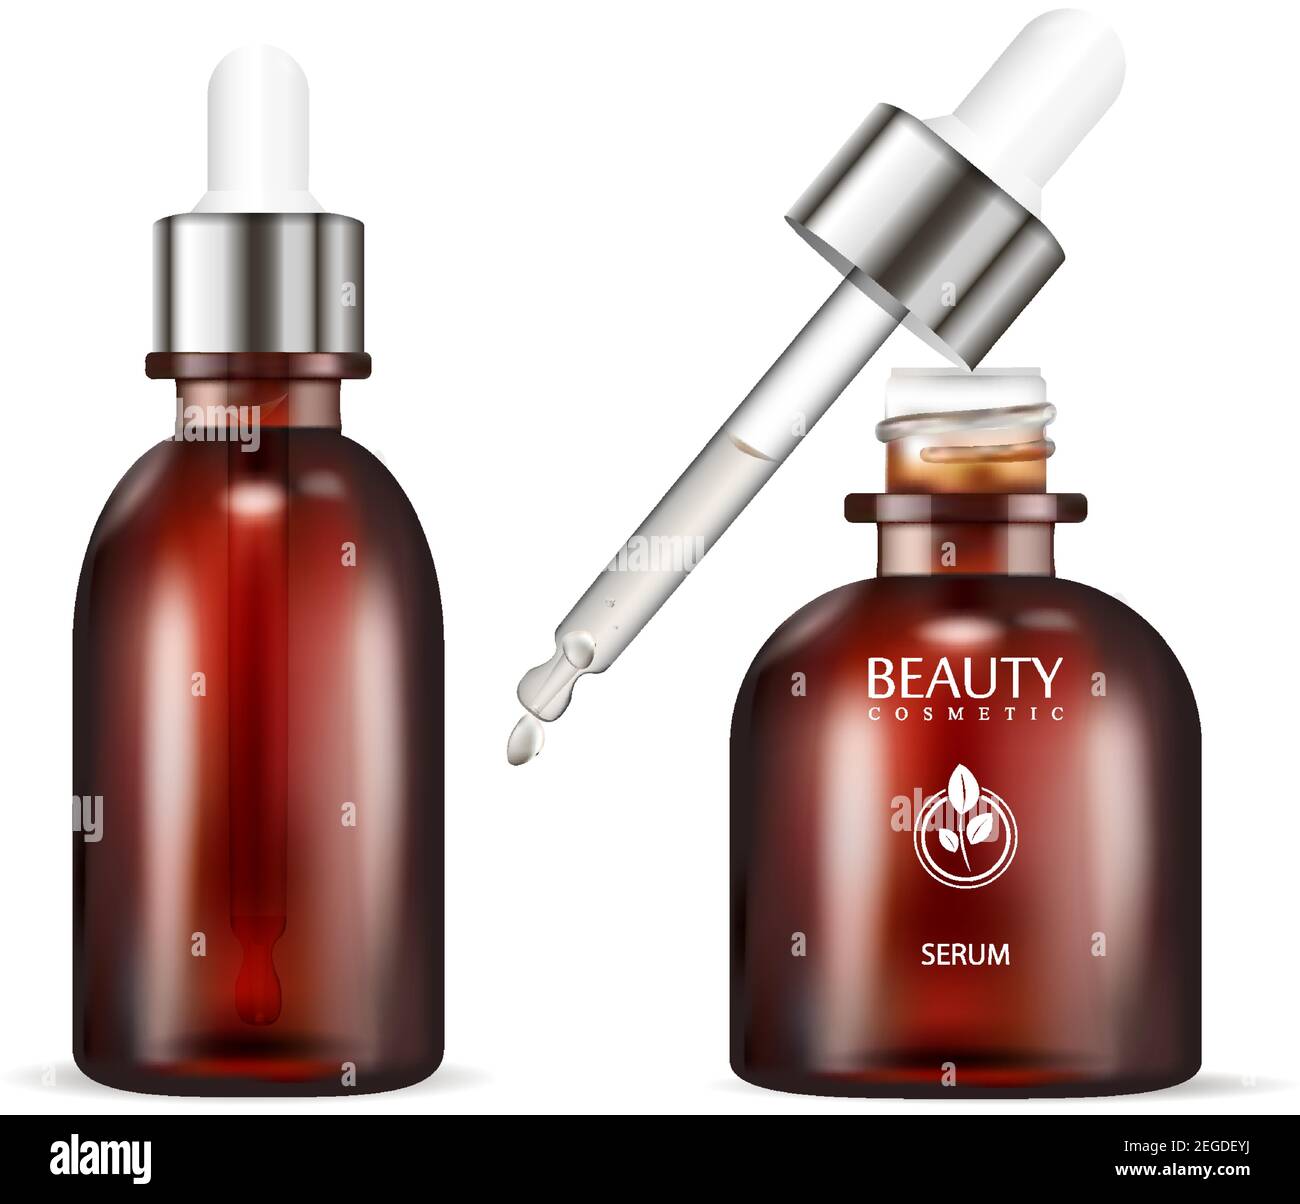 Serum bottle with dropper. Cosmetic Flacon. Vector Illustration. Vial for organic essential aroma oil. Brown glass bottle for essence. Realistic 3d pa Stock Vector